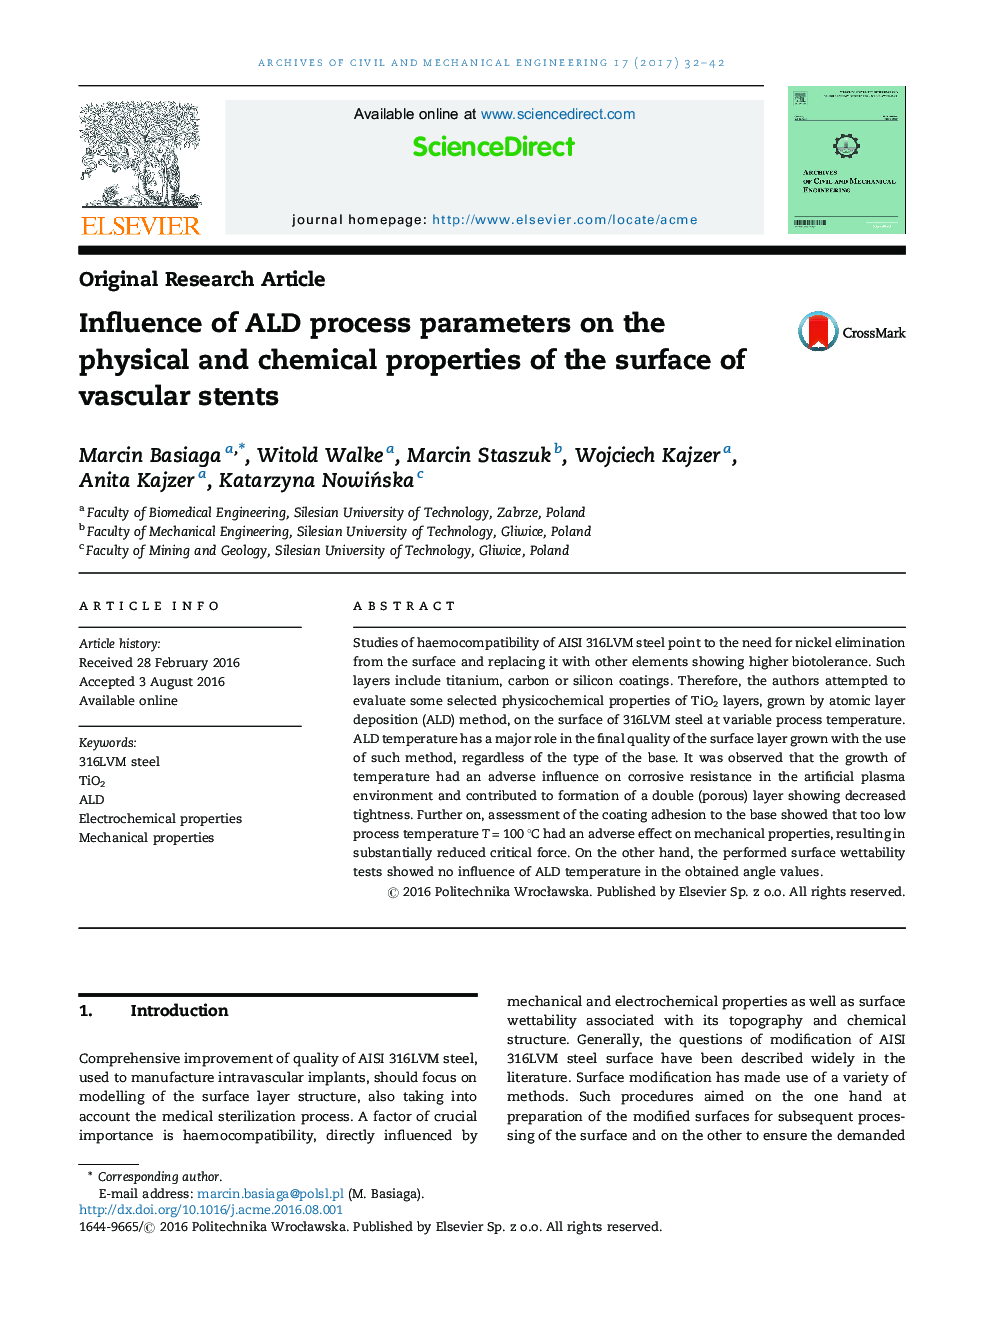 Influence of ALD process parameters on the physical and chemical properties of the surface of vascular stents